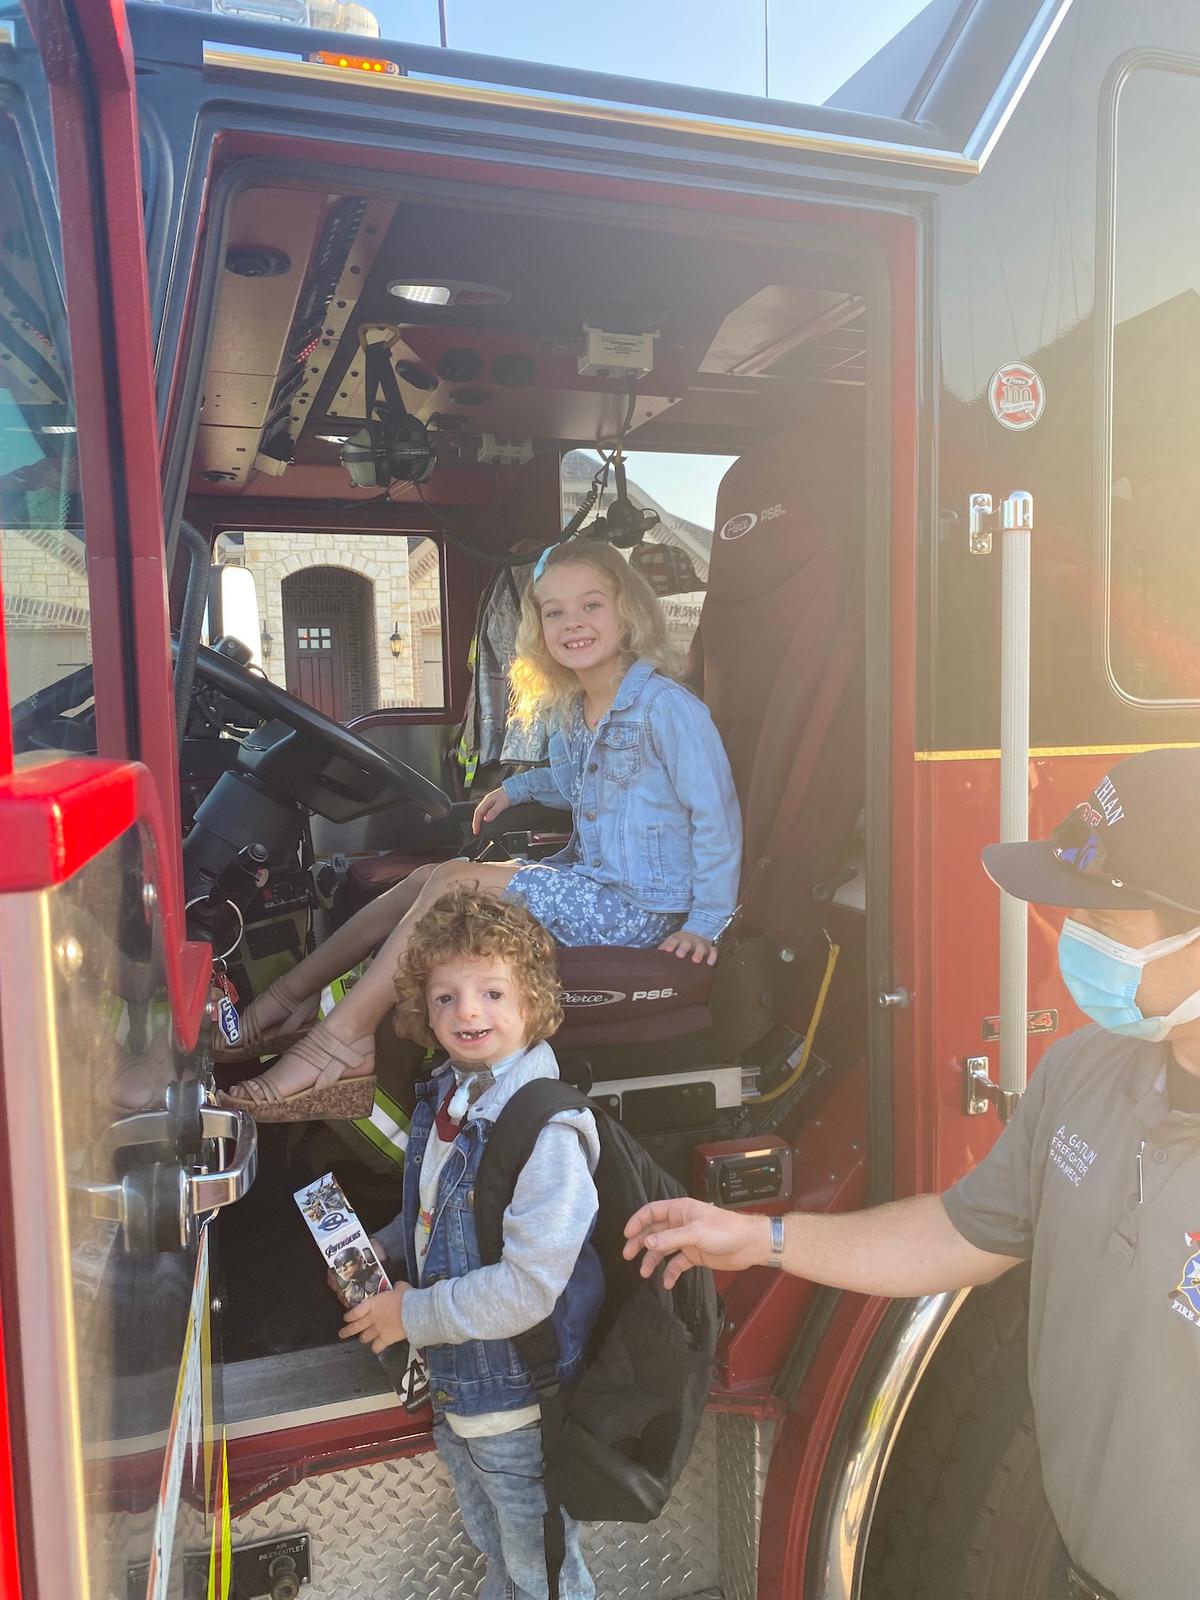 Michael and his sister in the fire truck on the first day of kindergarten. (Courtesy of <a href="https://www.facebook.com/brittanydenisonrealtor">Brittany Denison</a>)